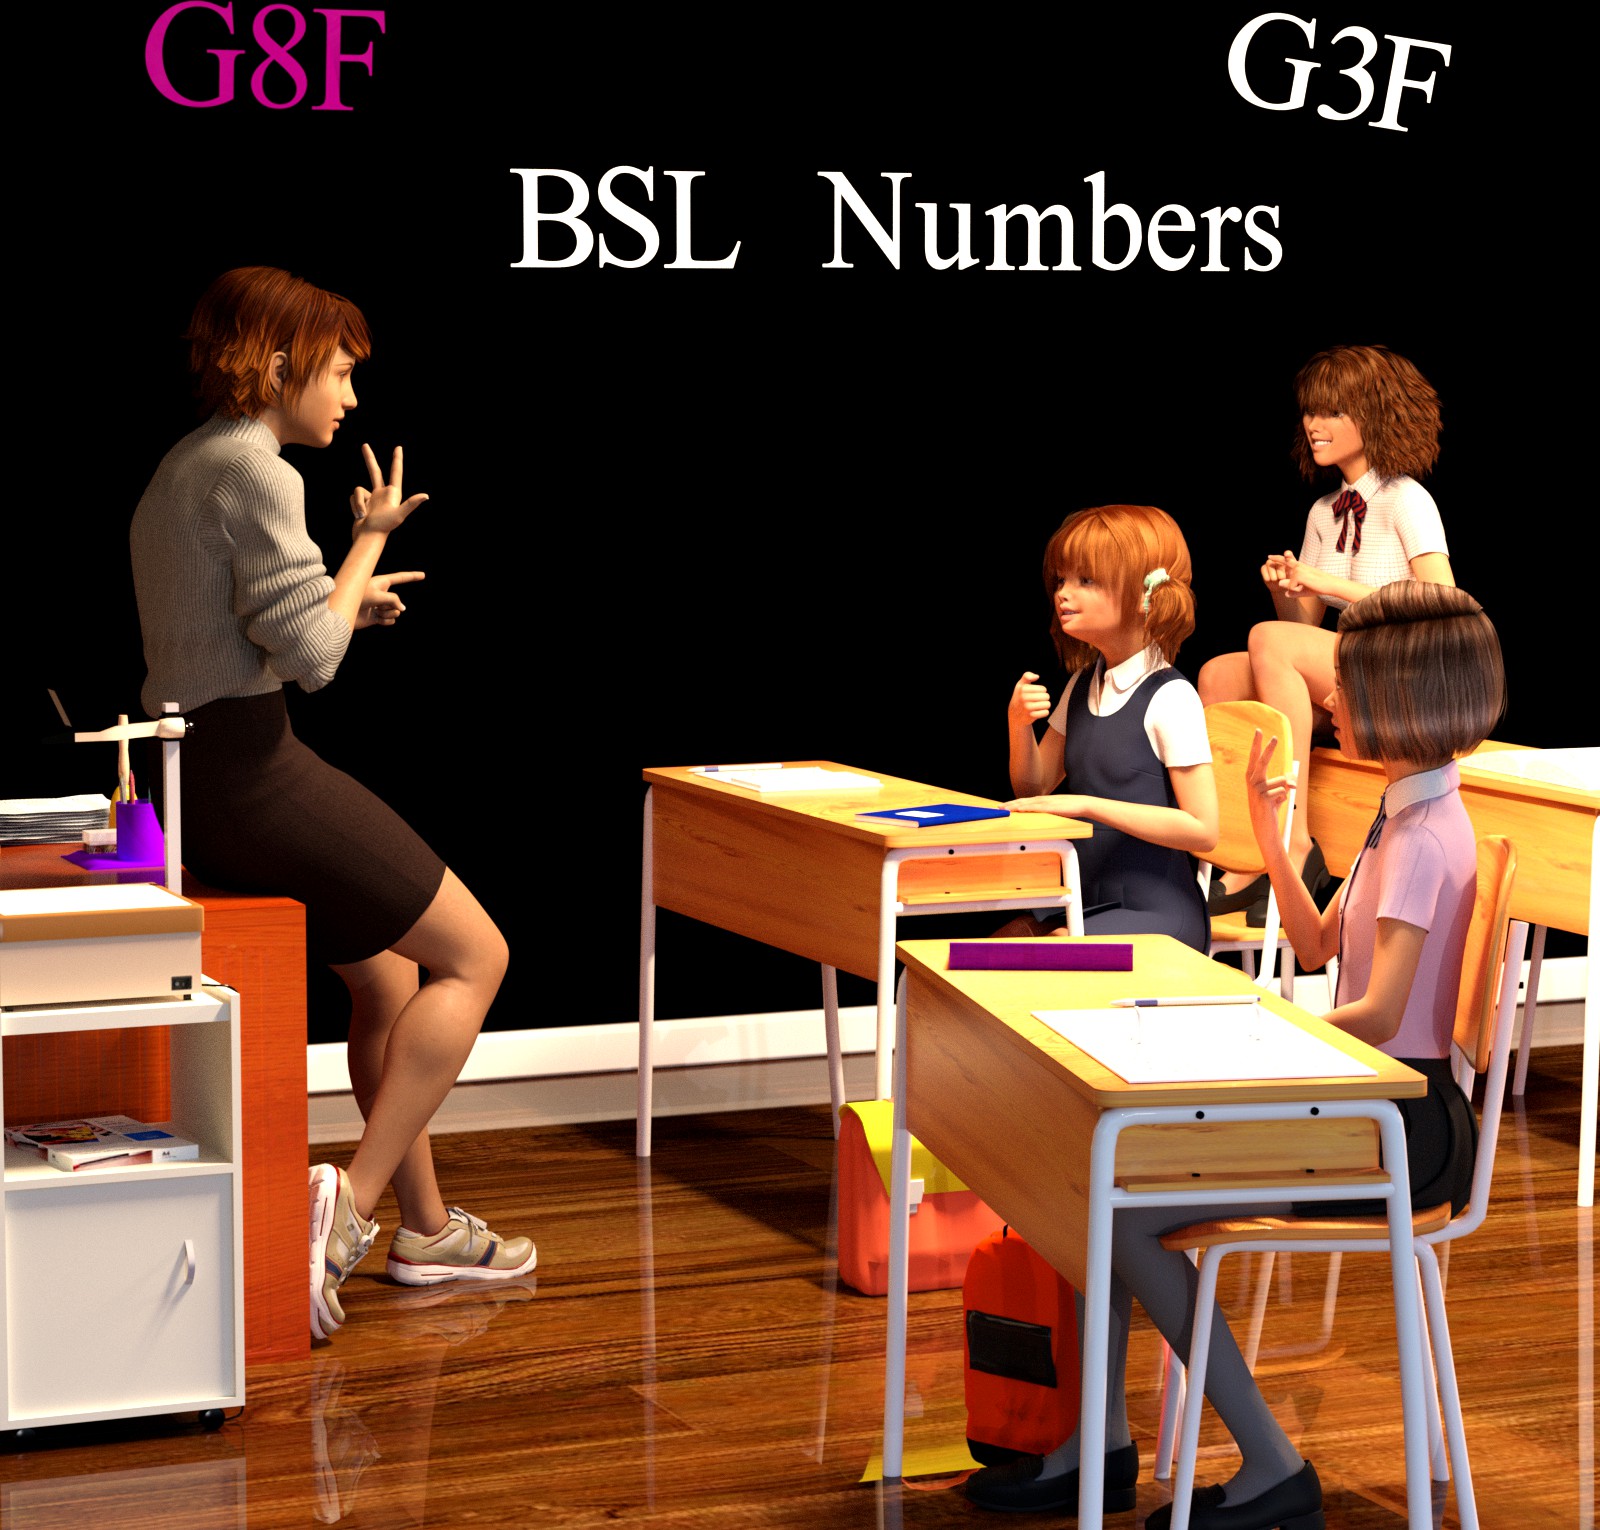 BSL Number Poses for G3F and G8F